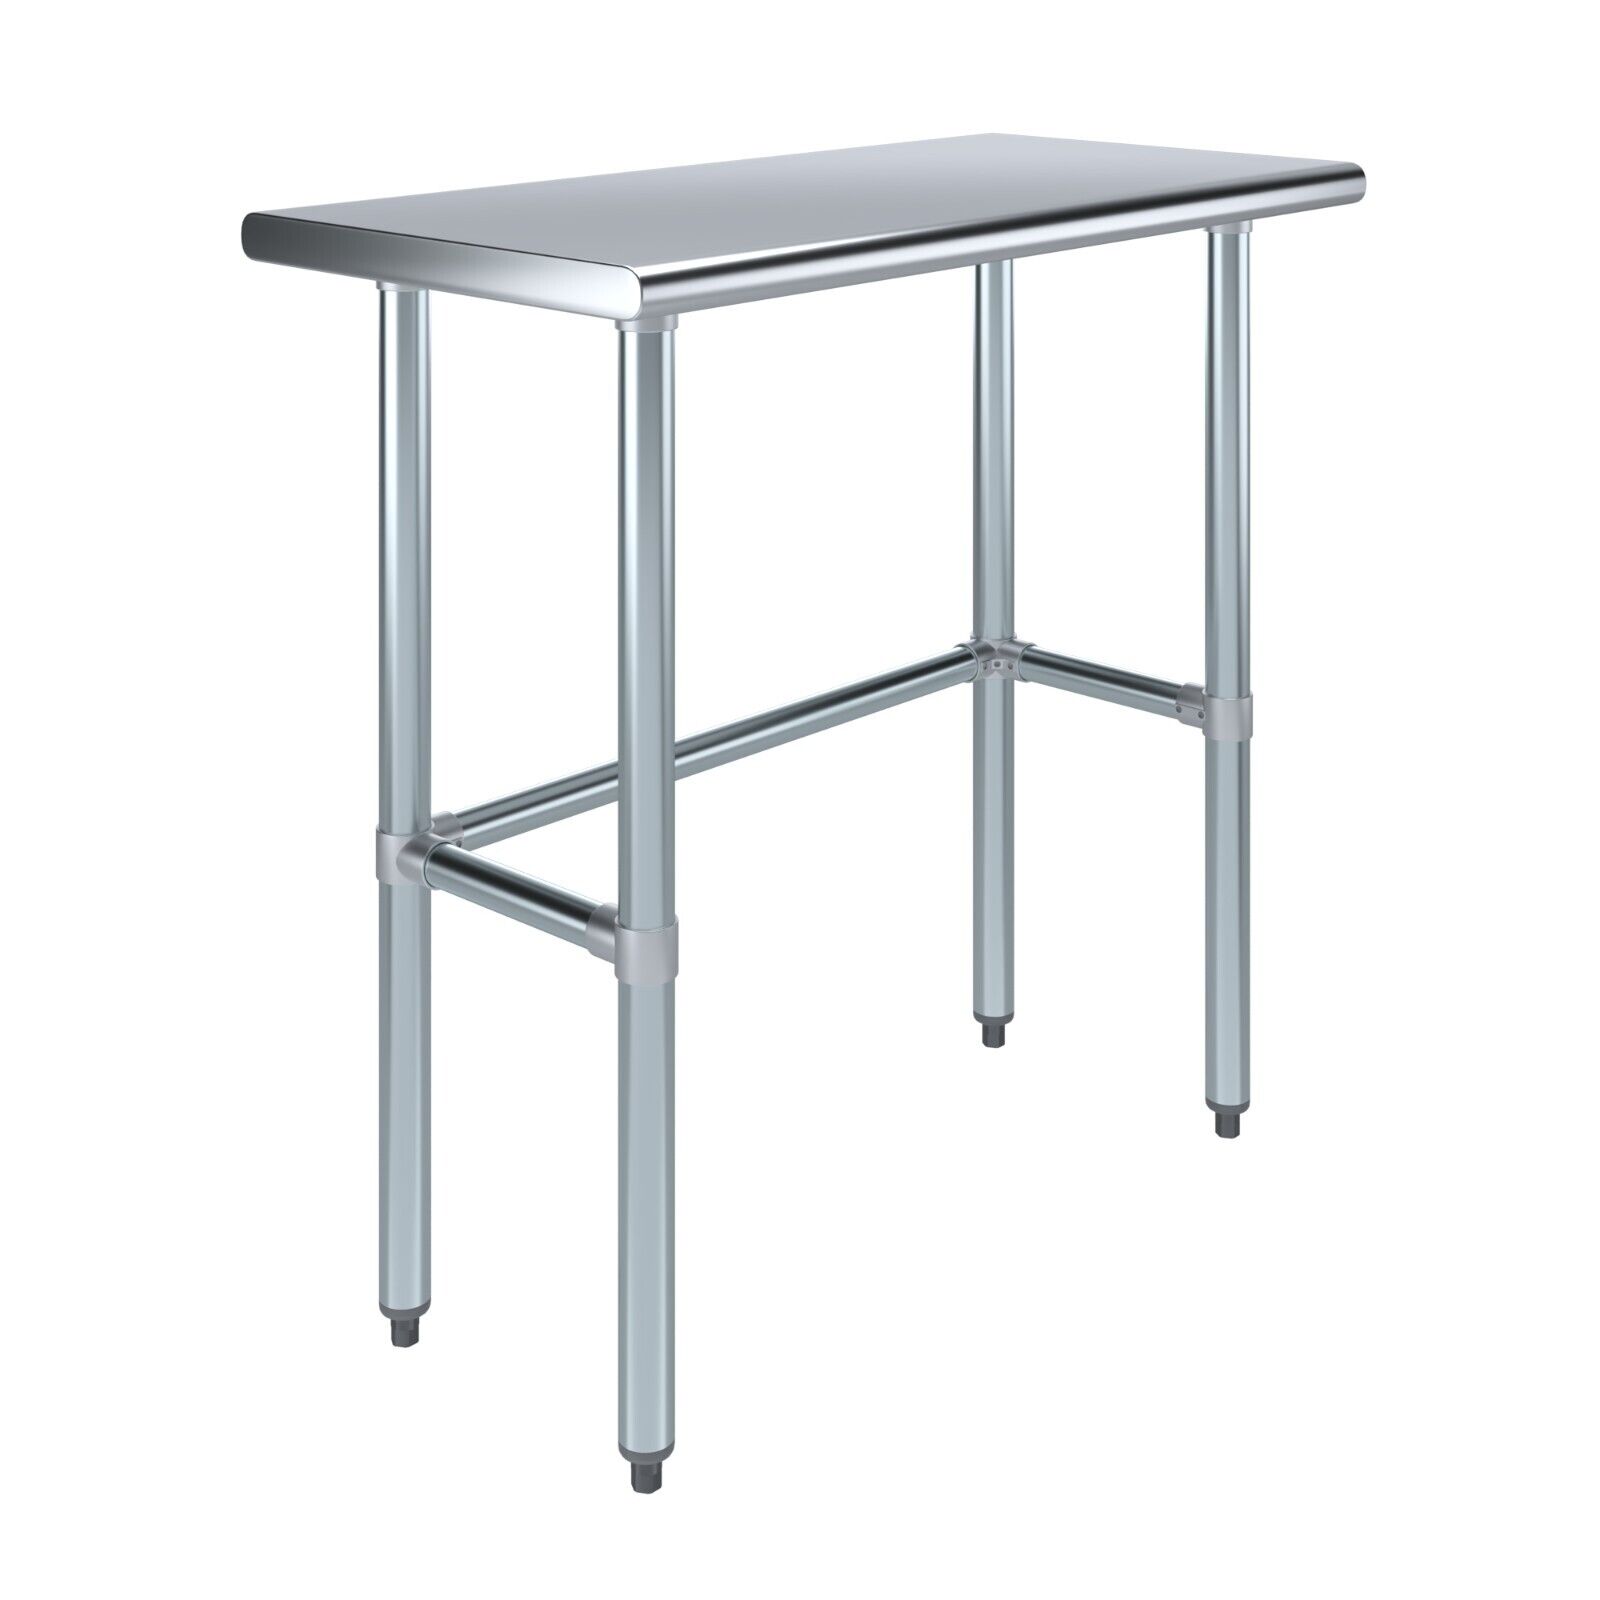 18 in. x 36 in. Open Base Stainless Steel Work Table | Residential & Commercial